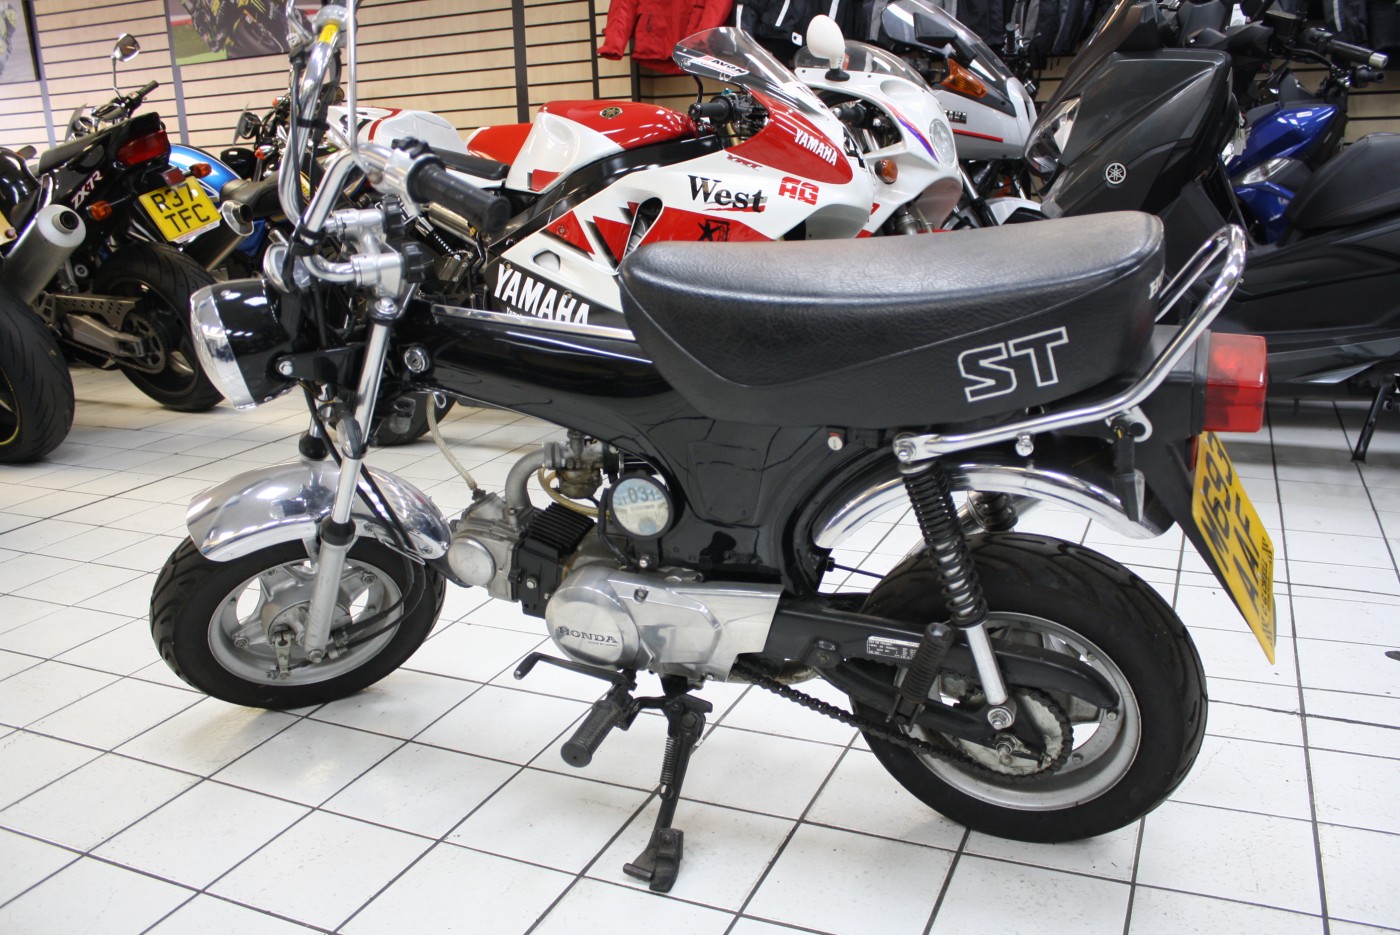 Honda ST Dax 50cc only 934 miles! - Cardiff Motorcycle Centre